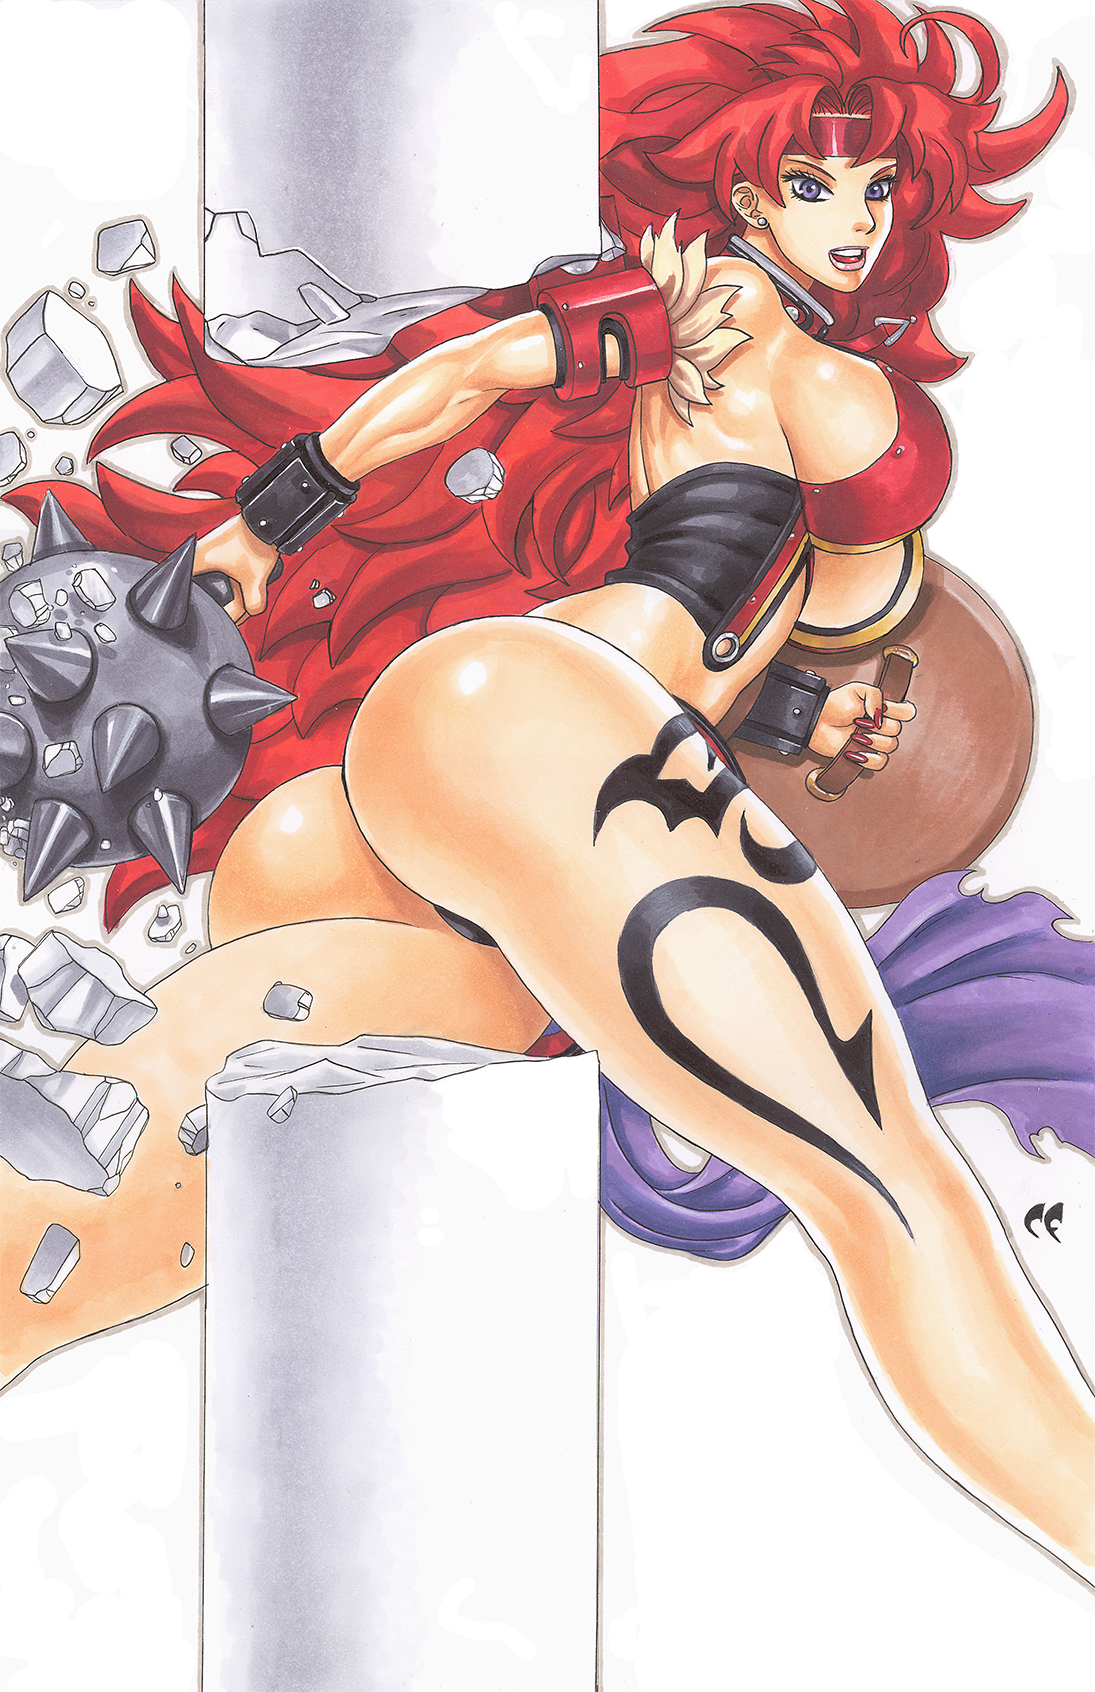 Risty from Queen's Blade